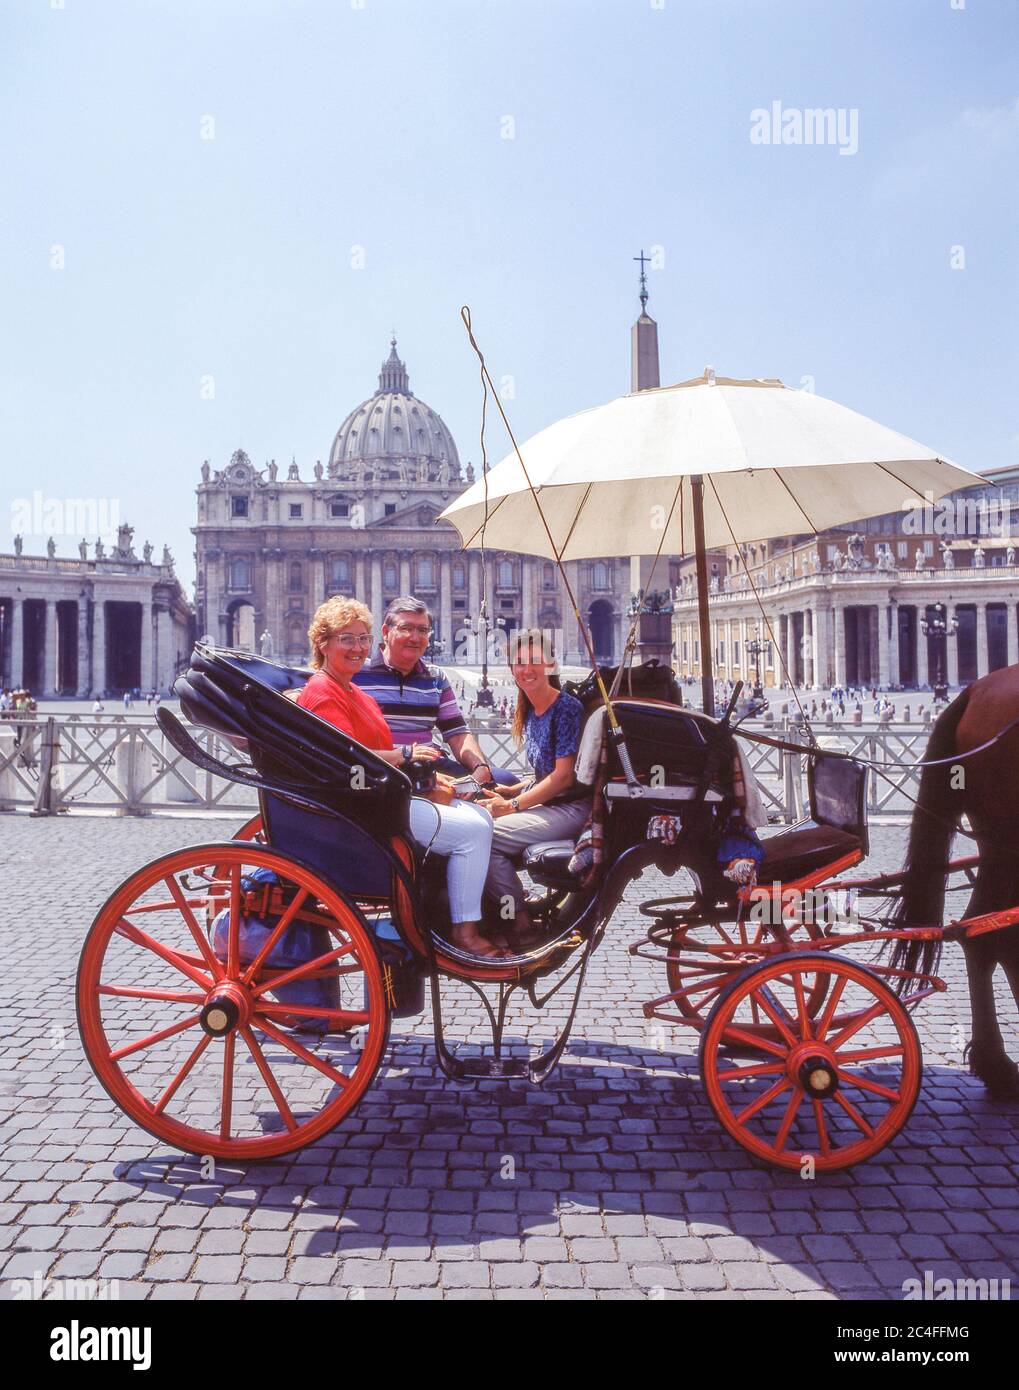 Tourists riding in horse carriage, St Peter's Square, Rome (Roma), Lazio Region, Italy Stock Photo